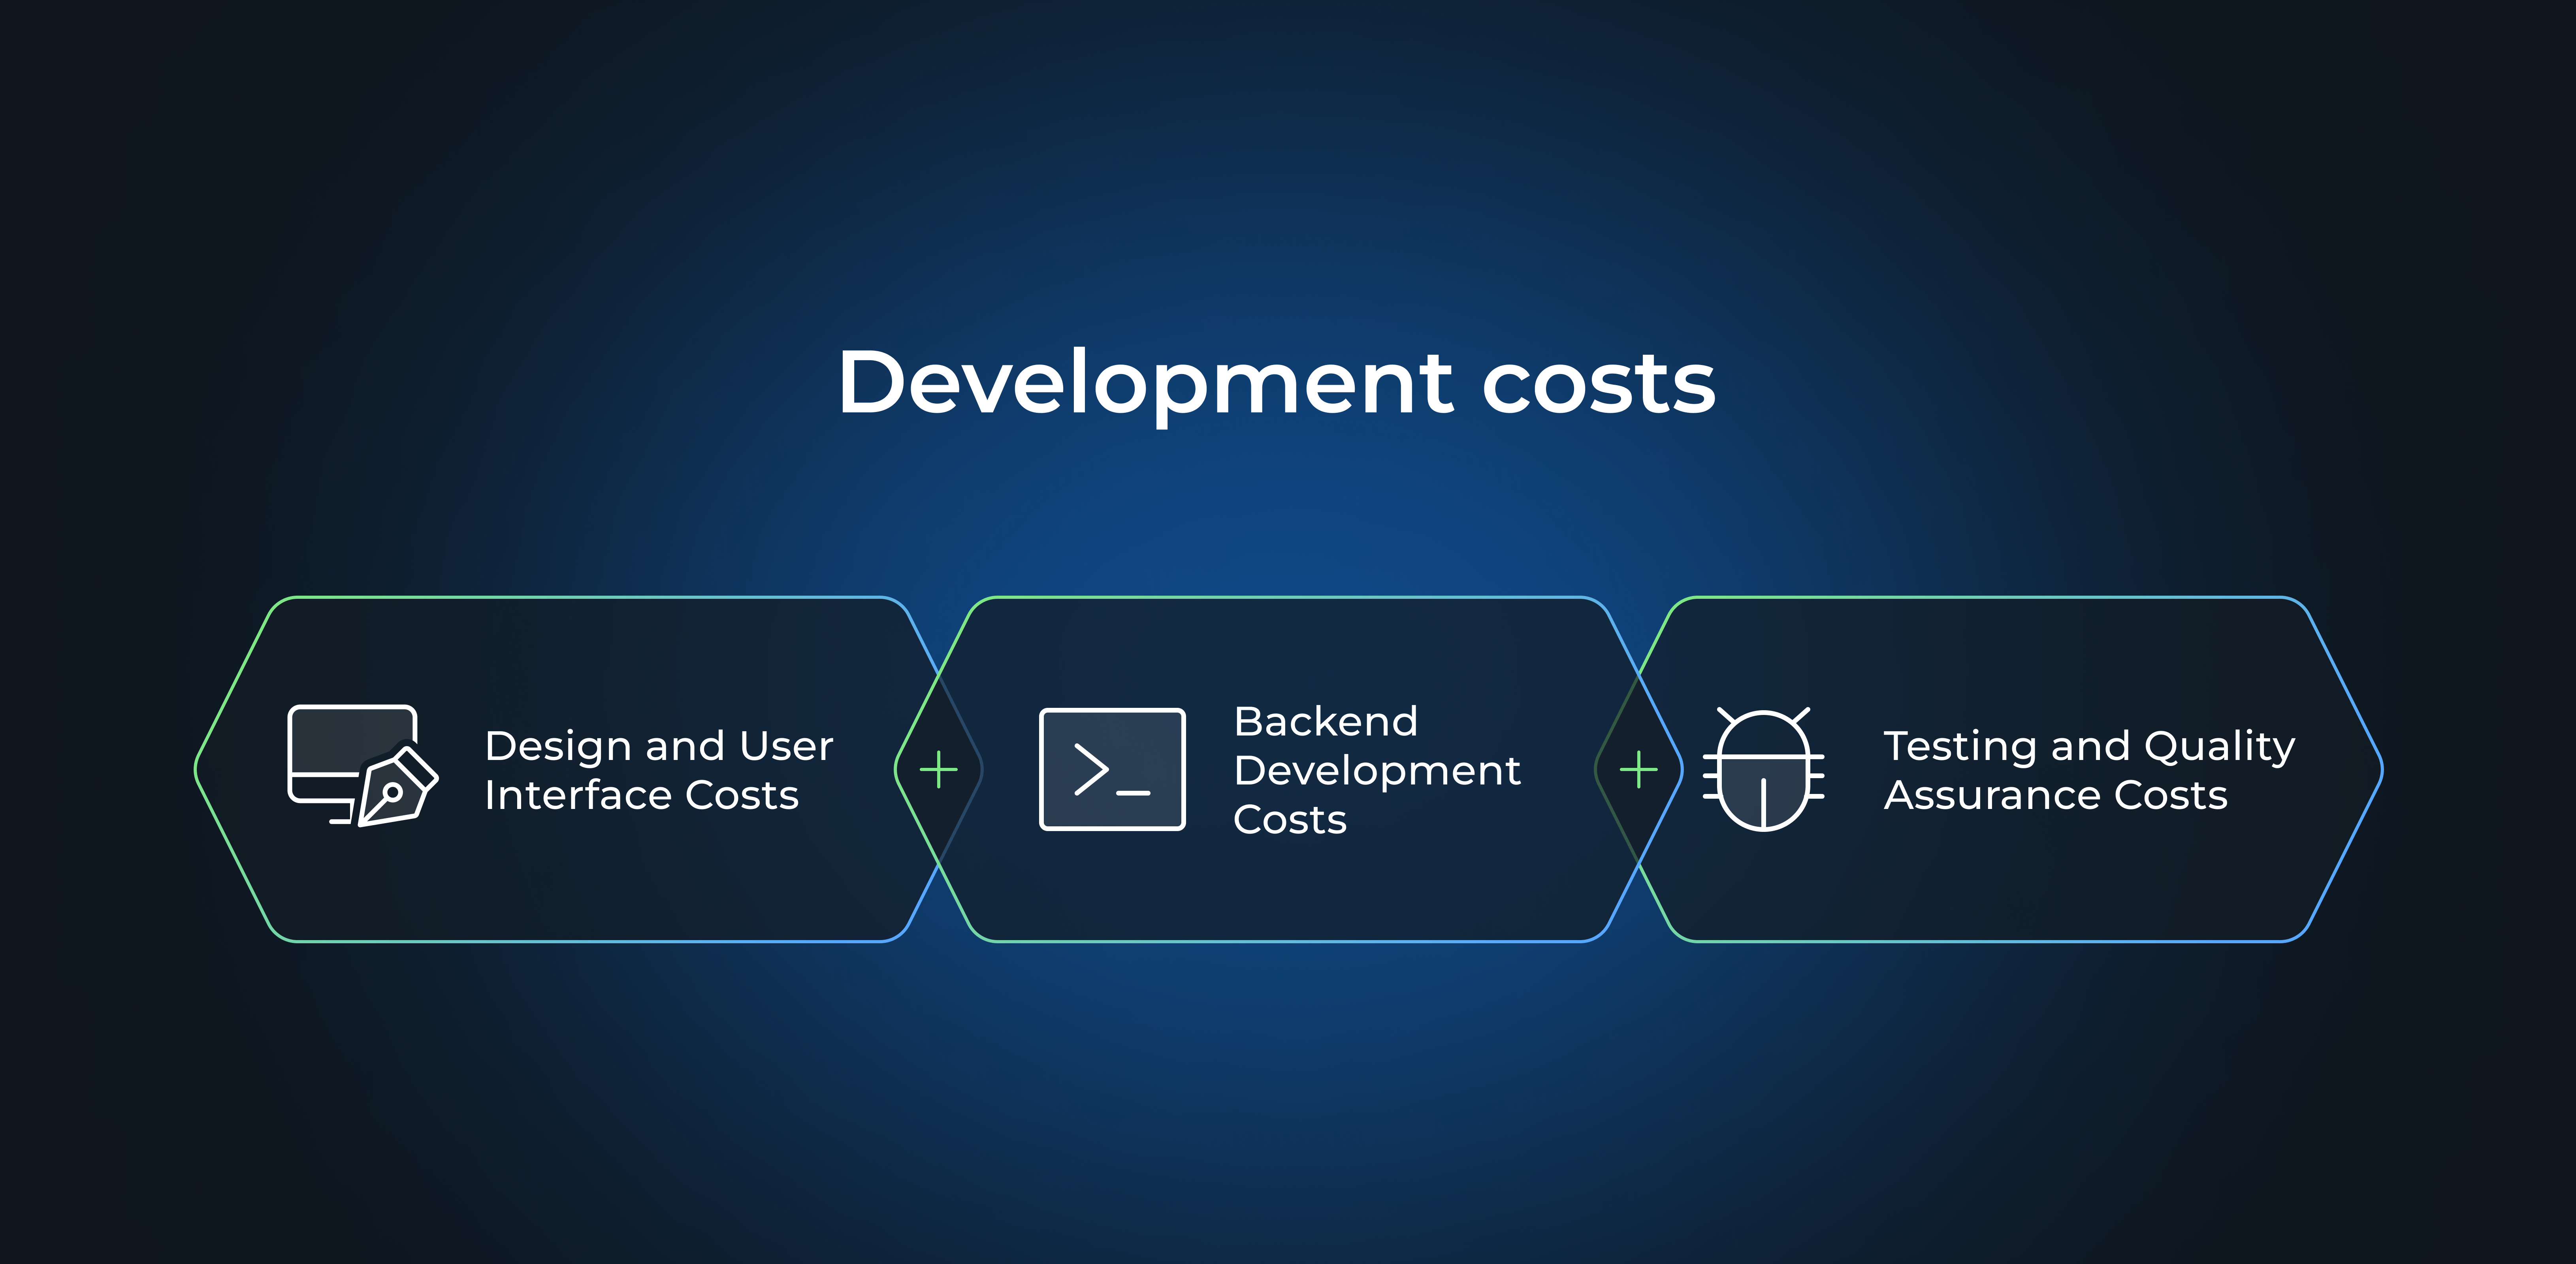 Development costs: Design, User Interface Costs, Backend Development Costs, Testing, Quality Assurance Costs
